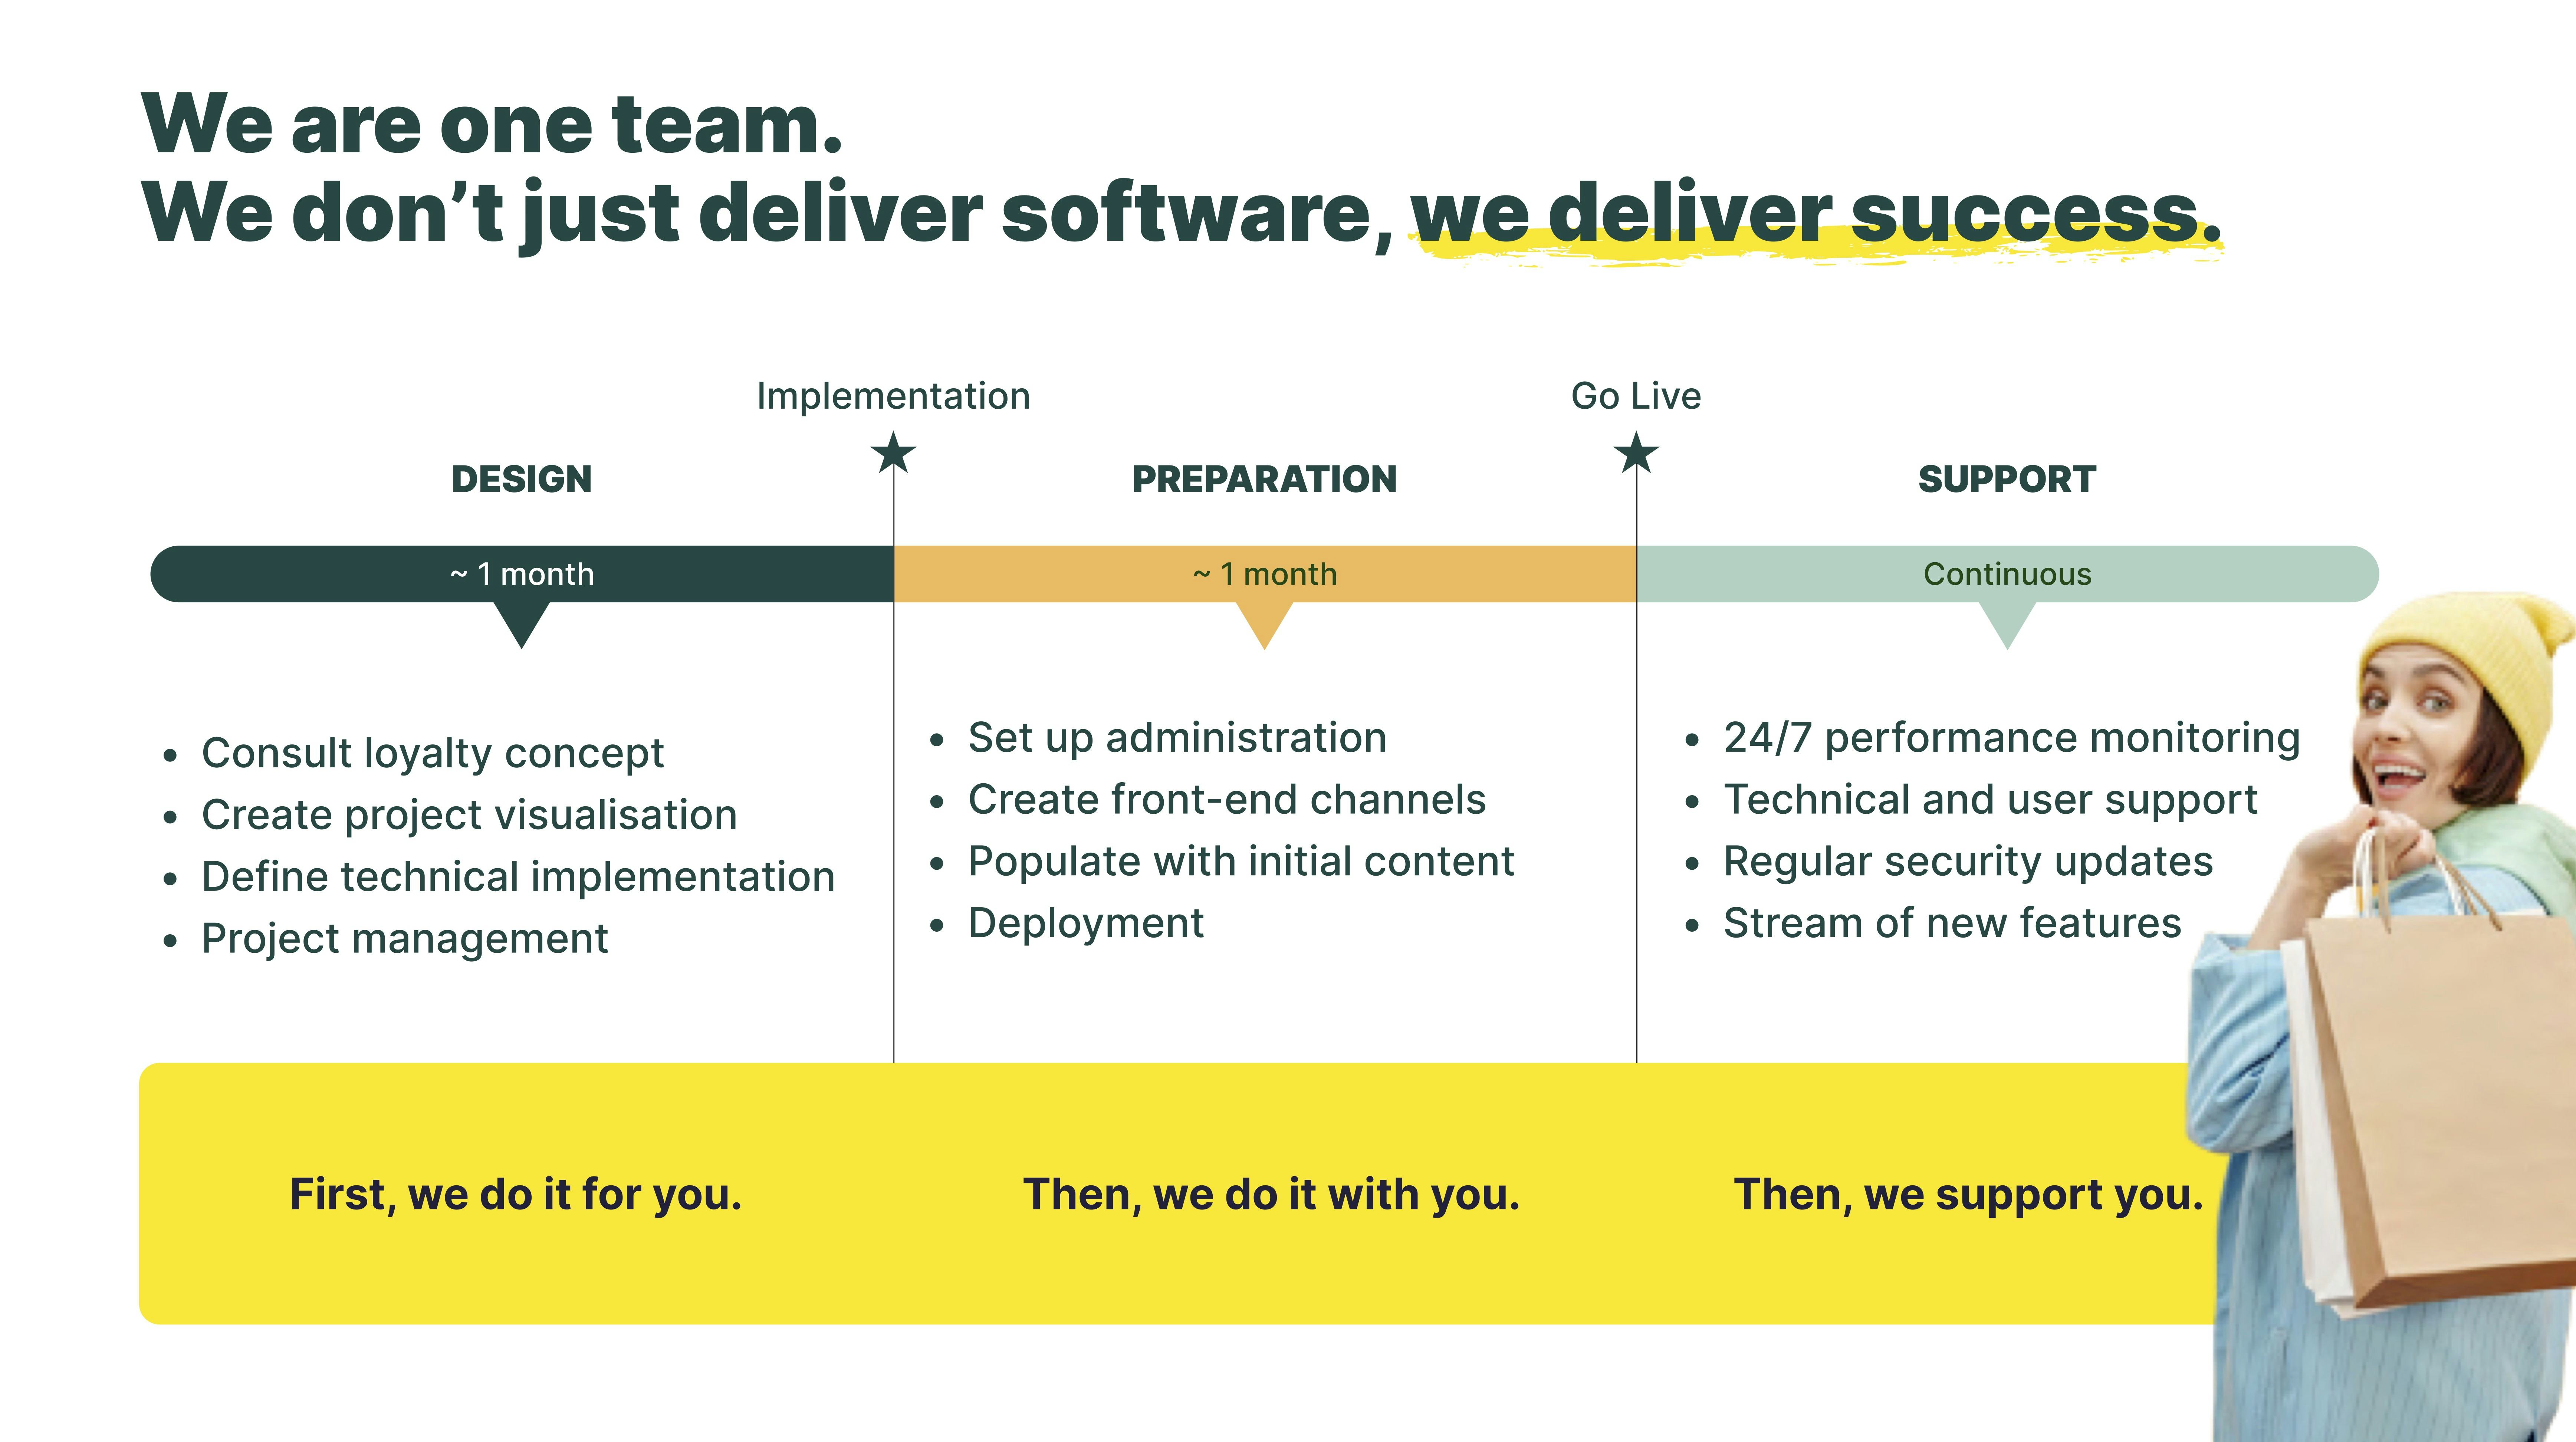 TRIFFT Software - TRIFFT goes beyond providing software - we deliver success!